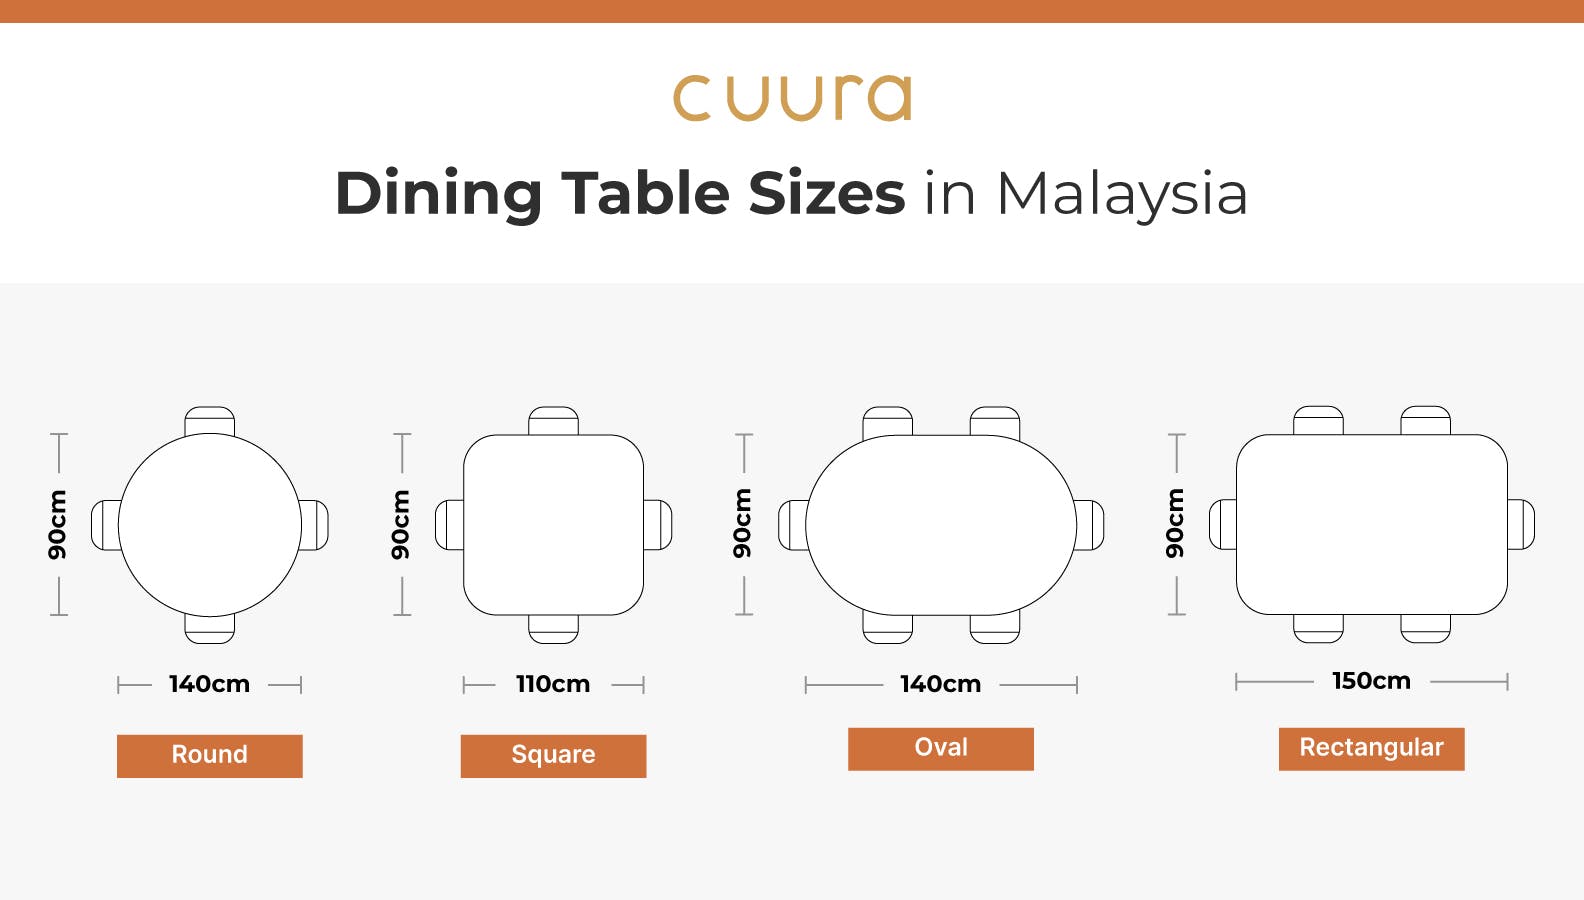 Dining Table Size Guide for Malaysians